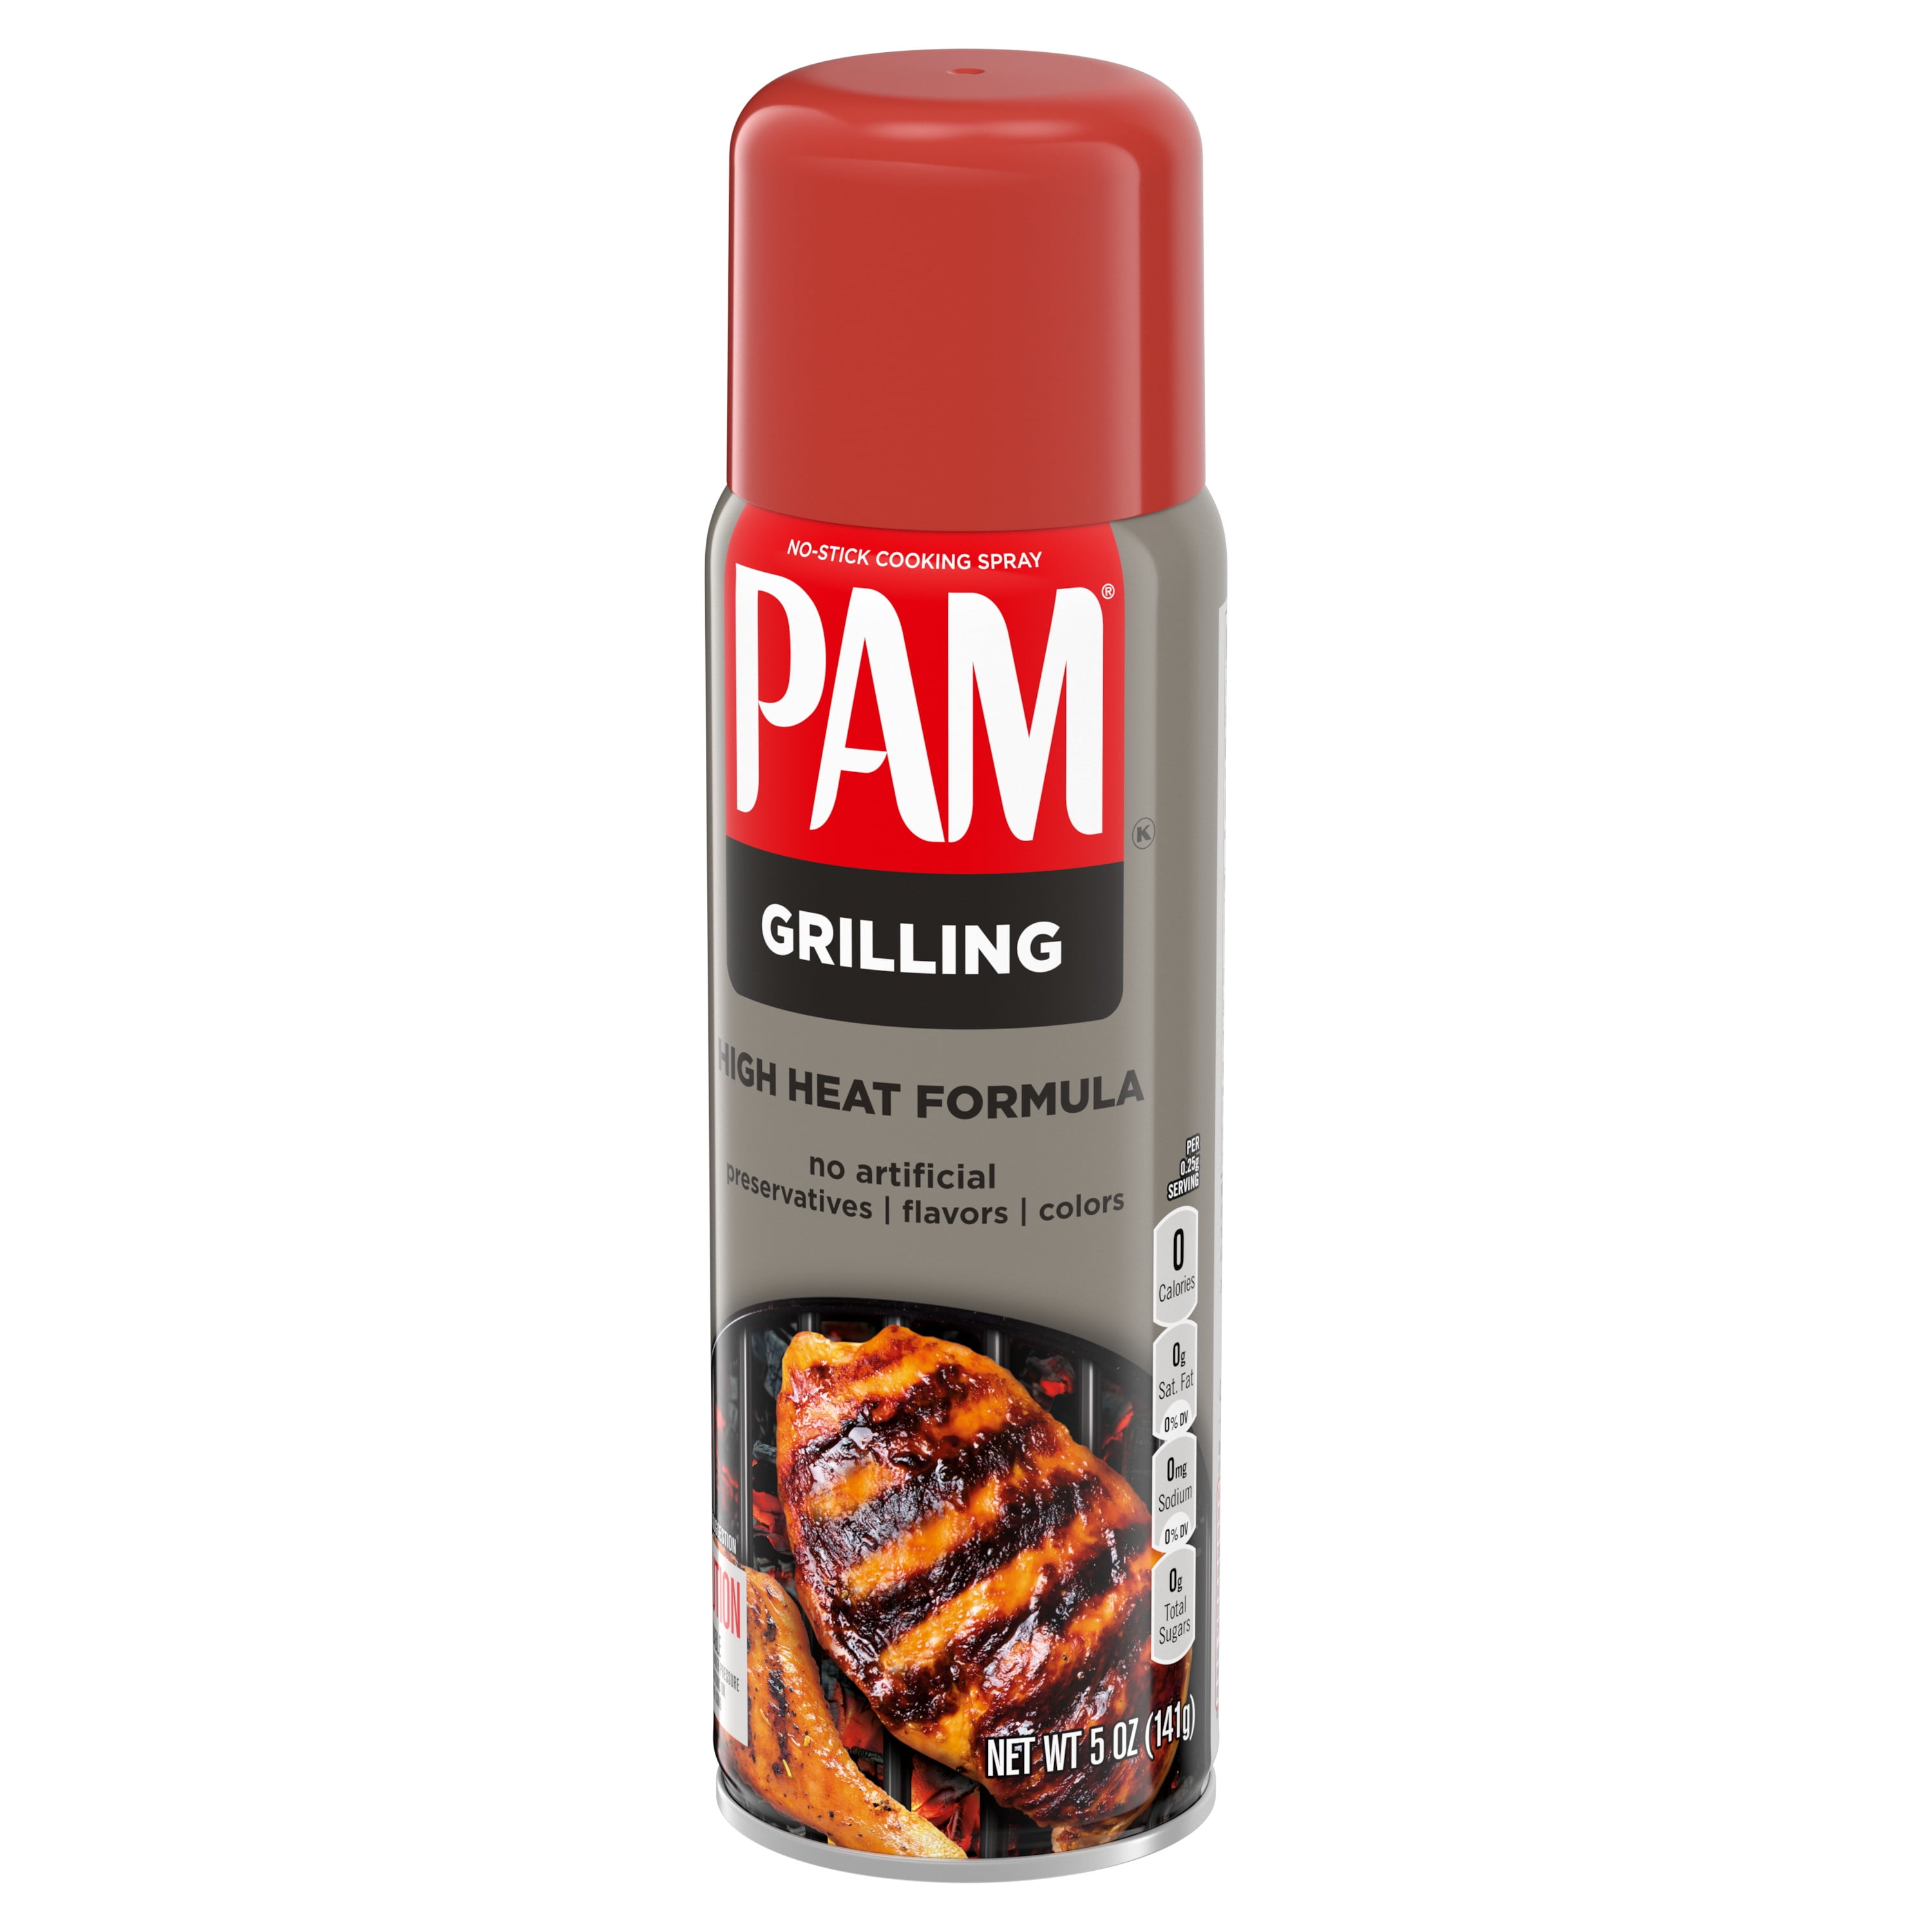 PAM 17 oz. No Soy Grilling Release Spray